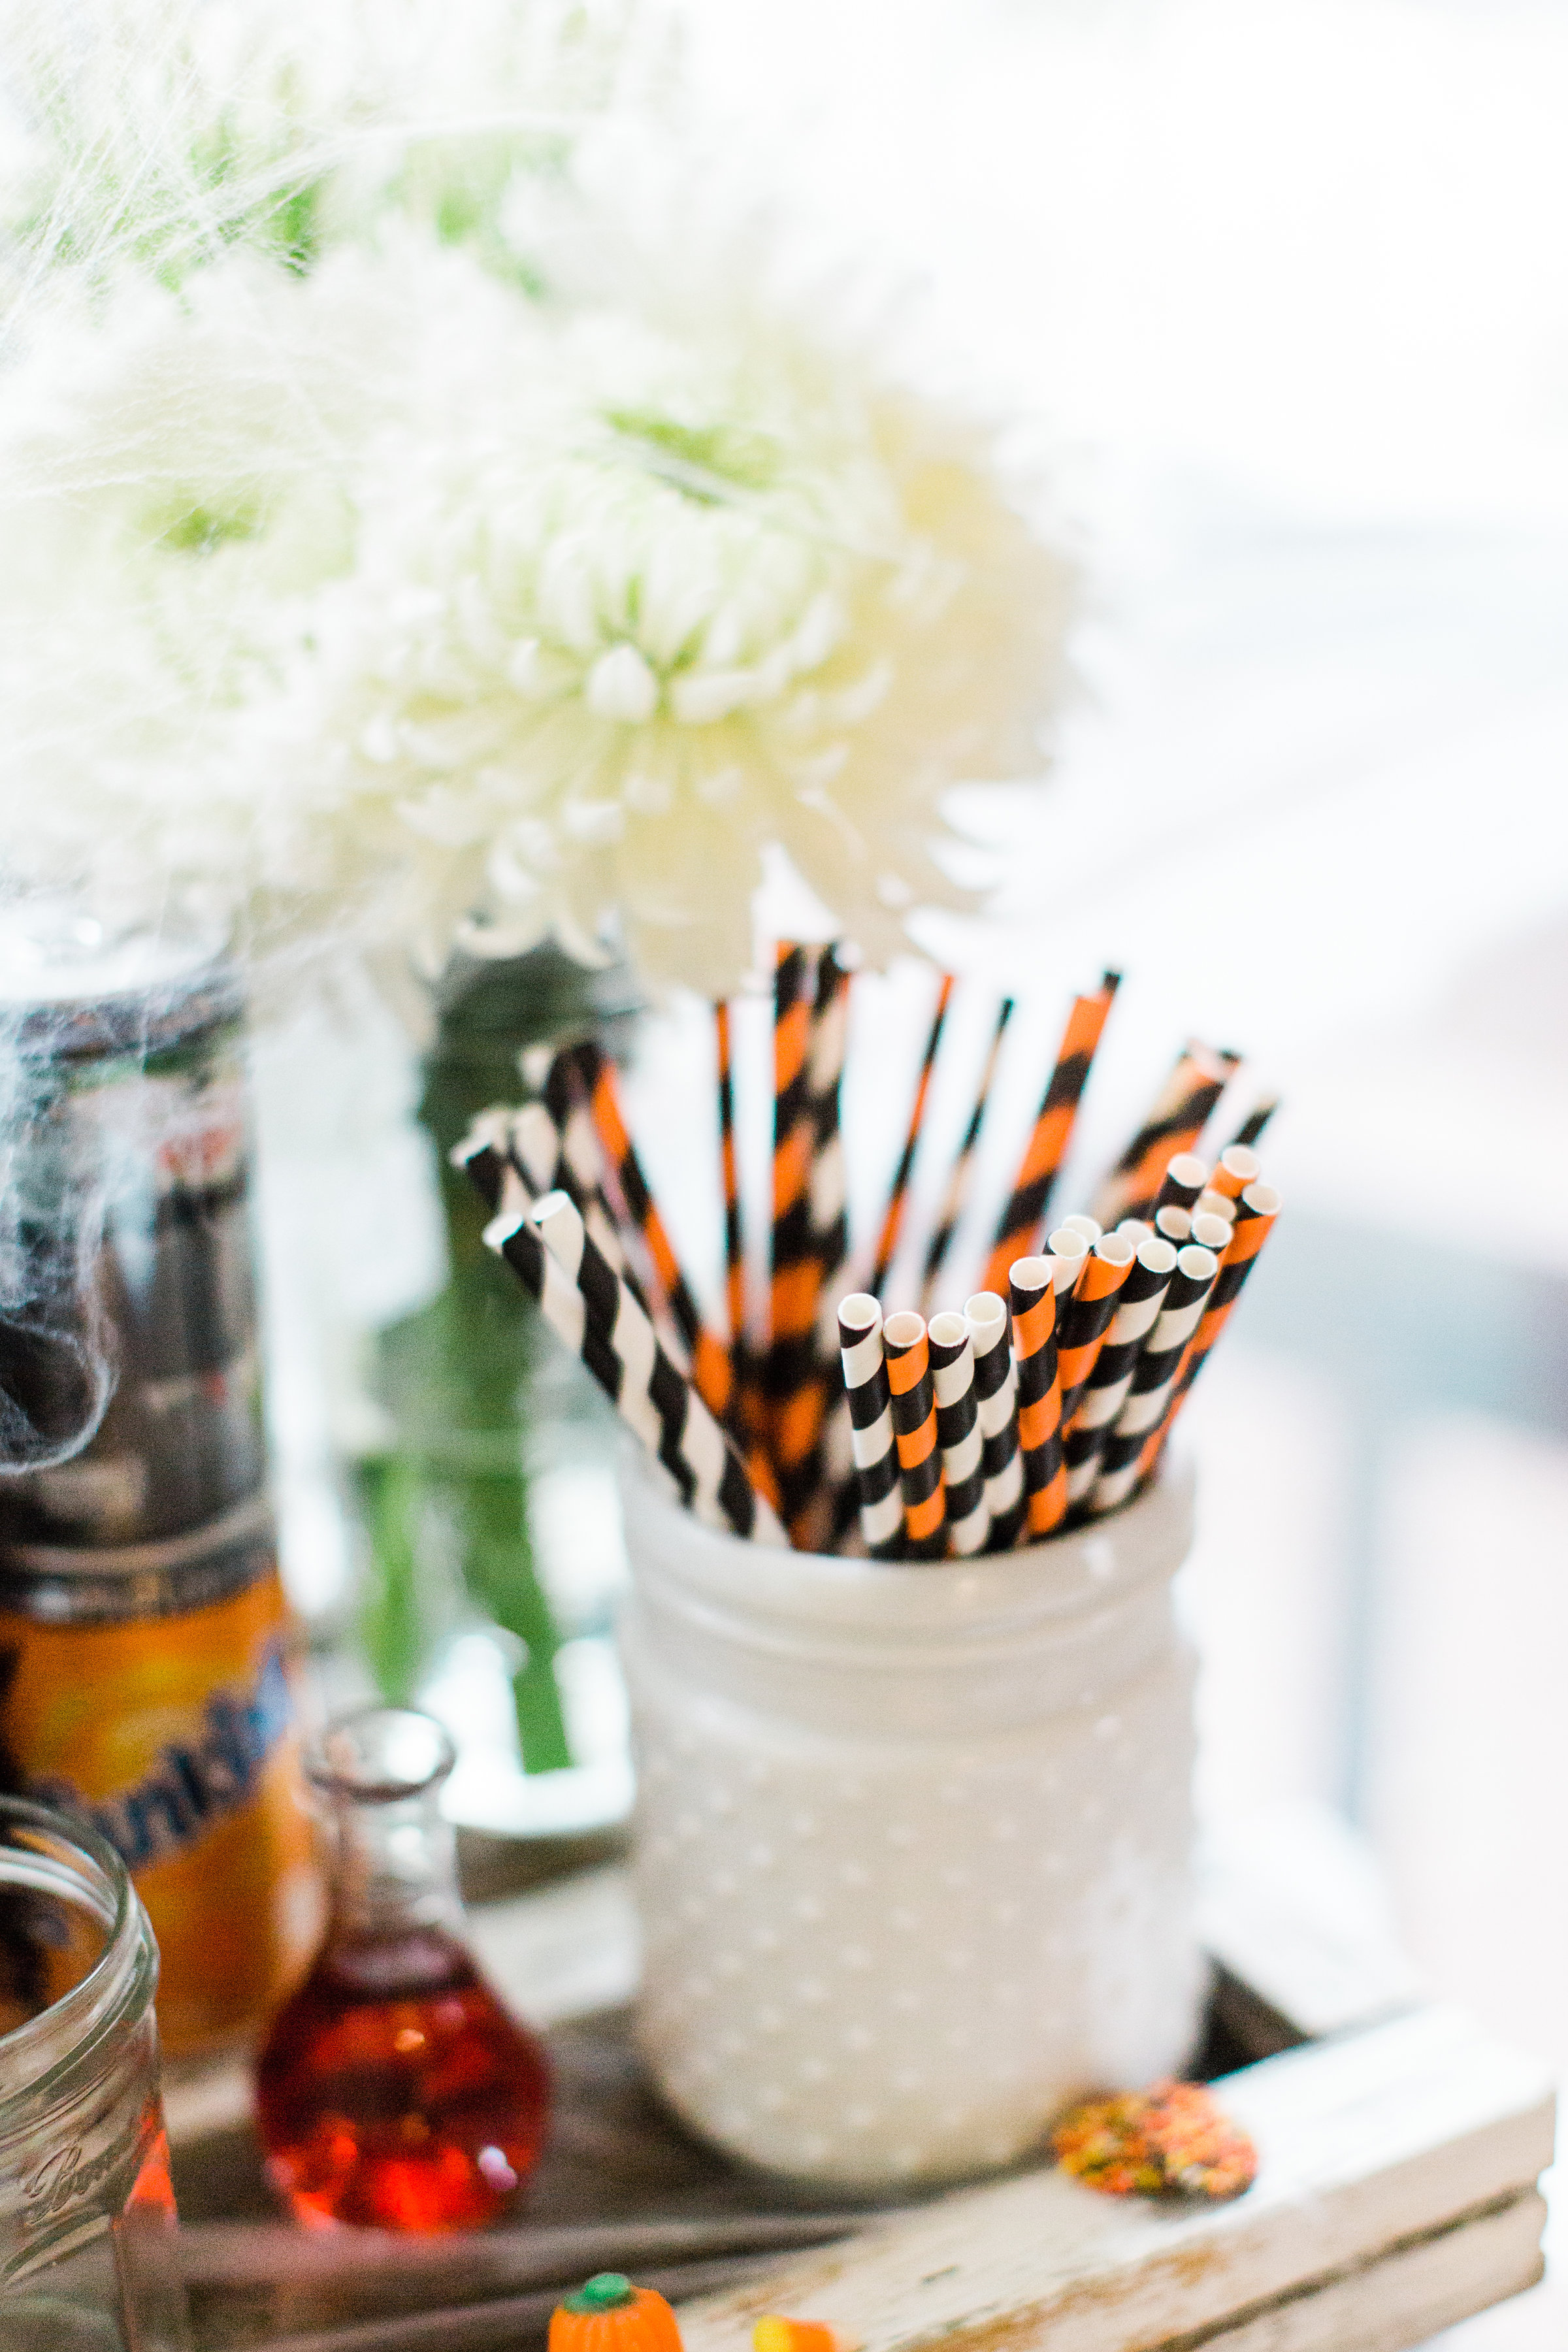 Create your own spooky Eat, Sip, and Be Scary Halloween Party Station for your next haunted bash! #Halloween #HalloweenParty #HalloweenDecor #halloweencandy #halloweendessert #dessertstation Click through for the scary fun details. | glitterinc.com | @glitterinc